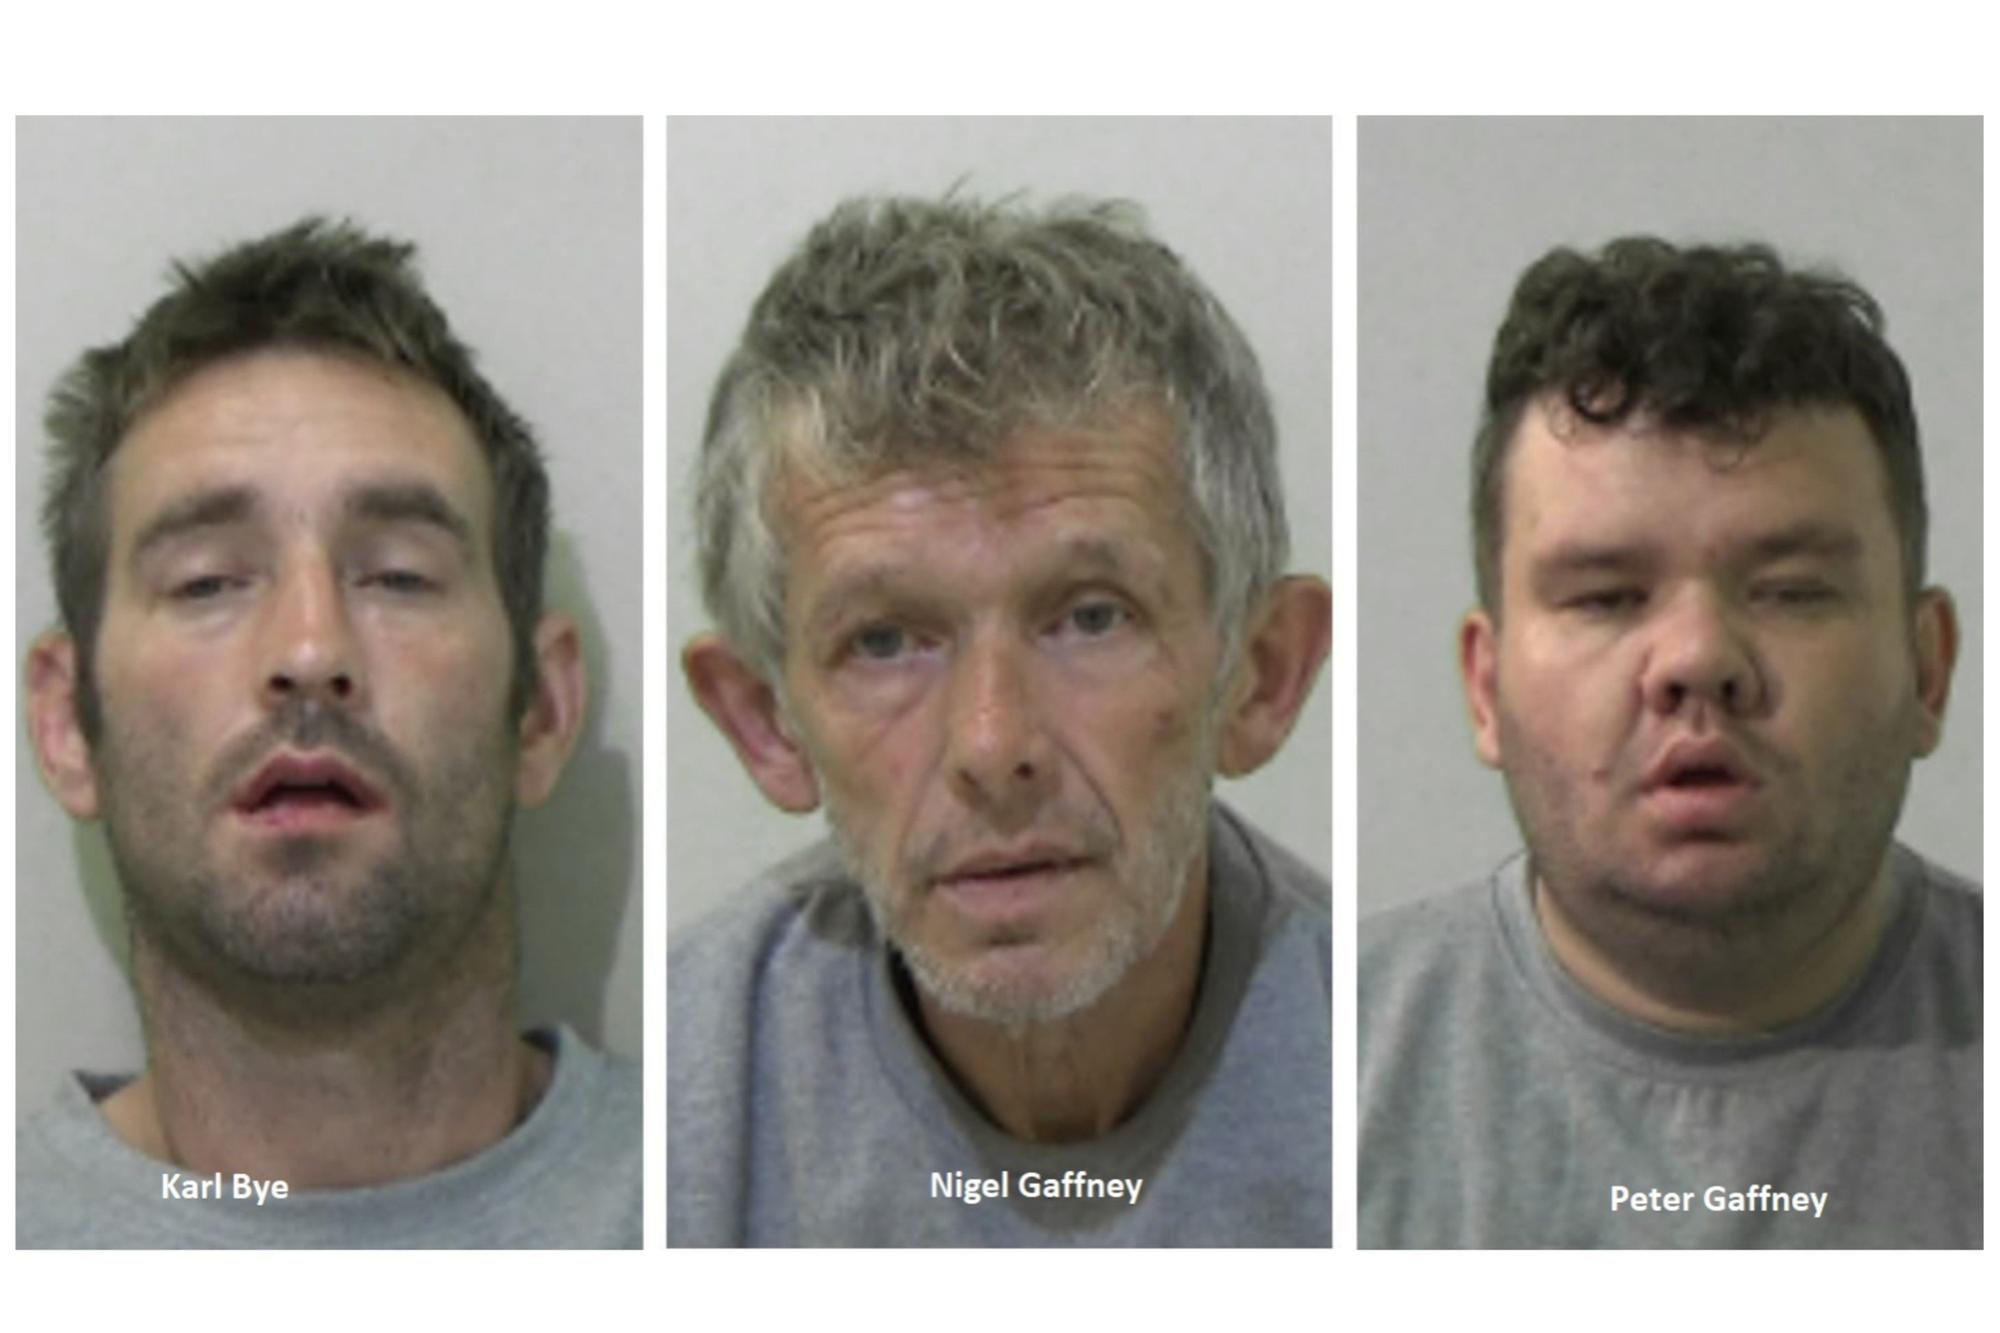 The three men have all been given prison sentences.